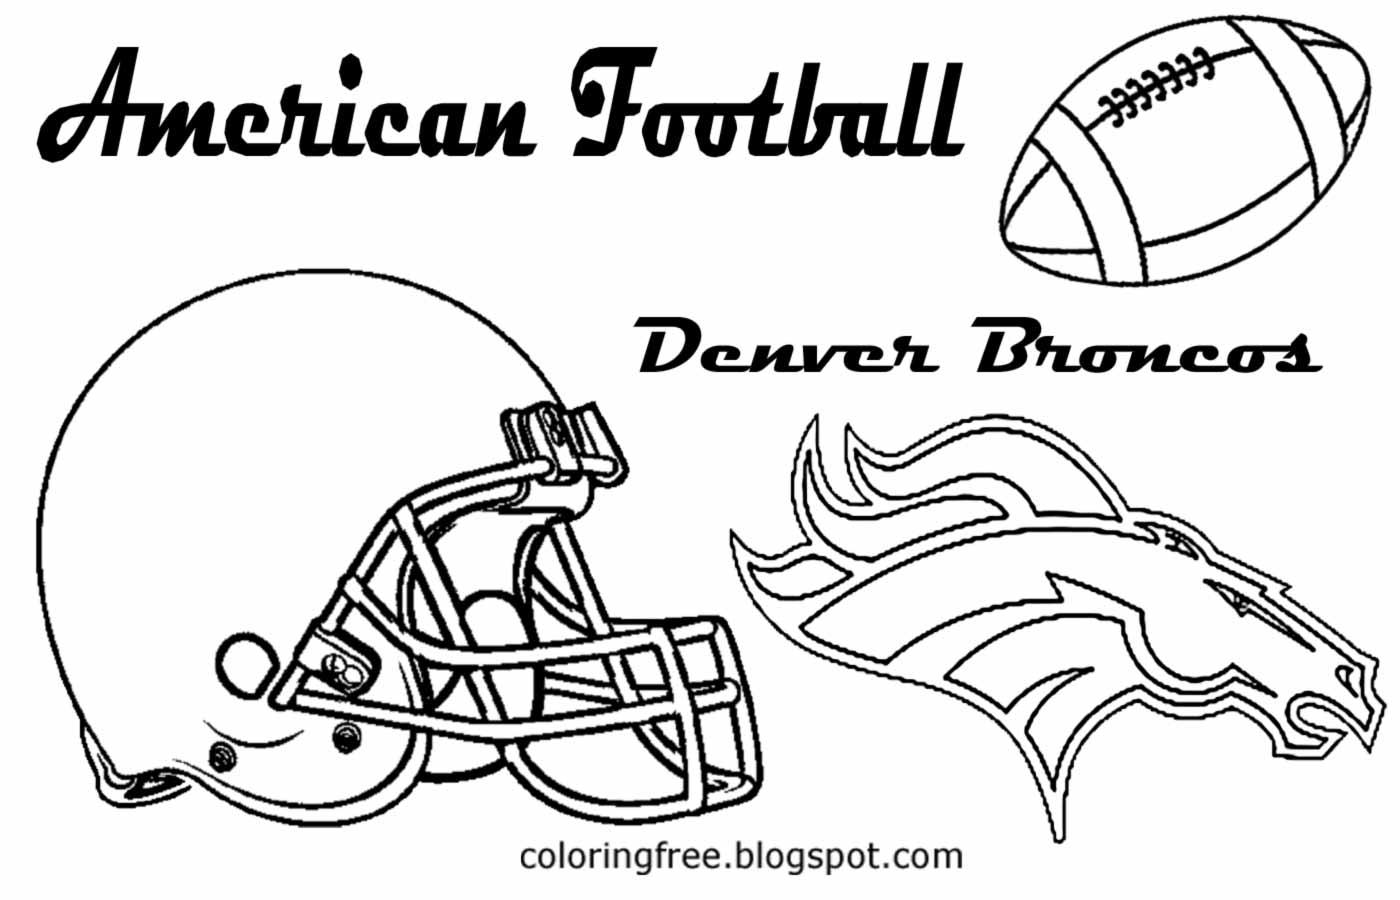 Denver Broncos printable American team football coloring book pages for boys US sport games